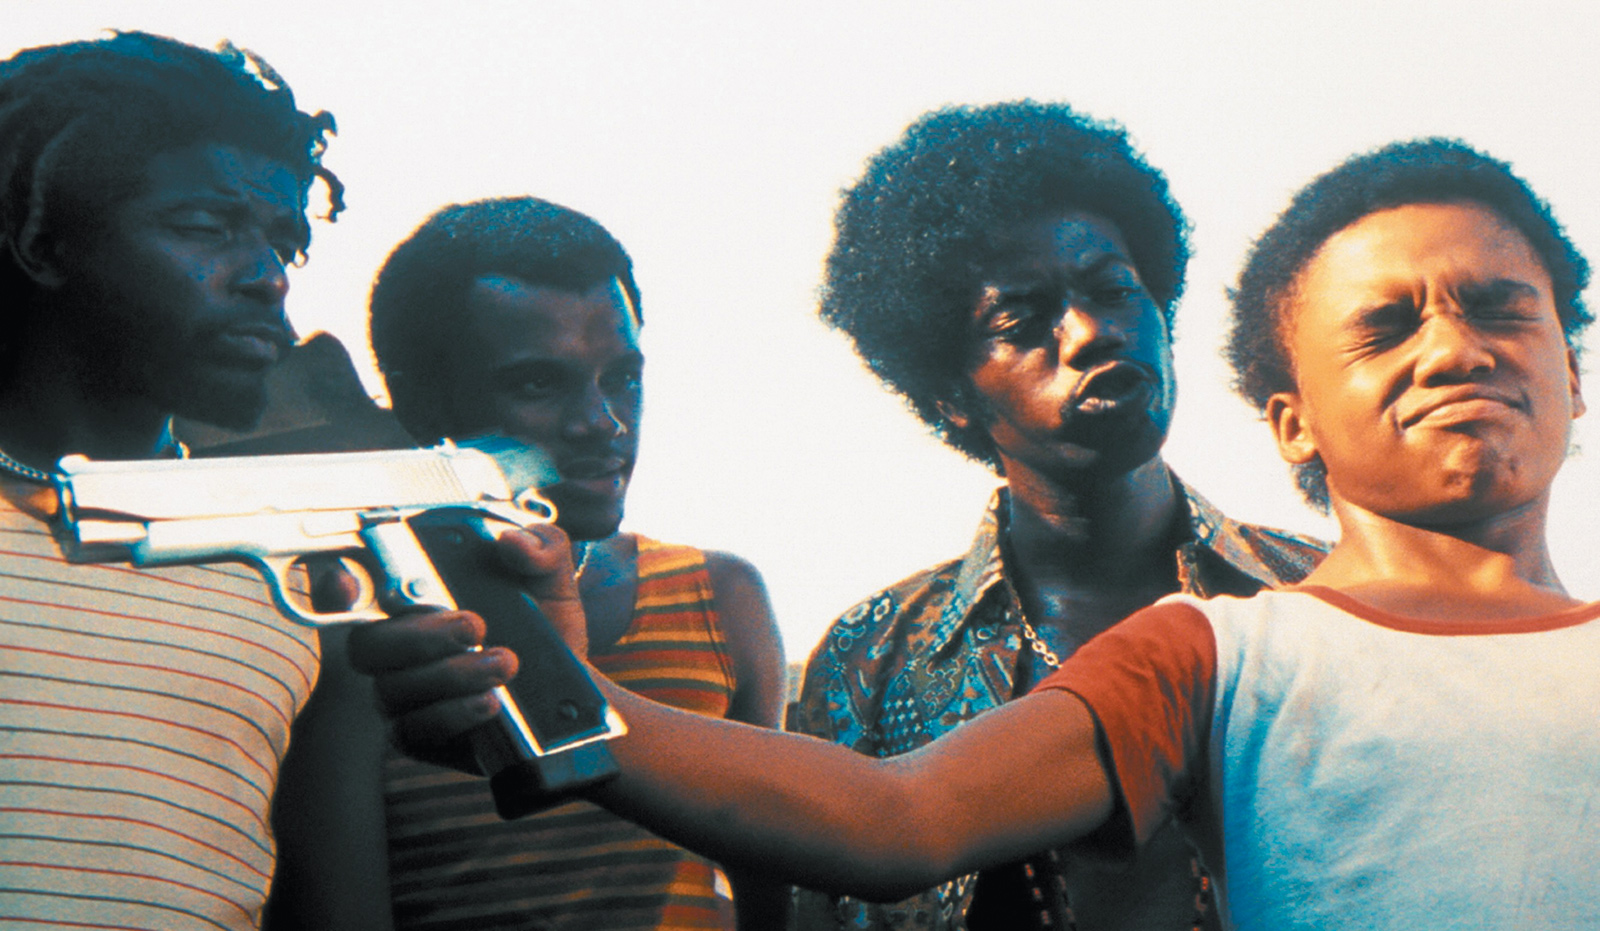 A scene from the film City of God (2002), based on the novel by Paolo Lins